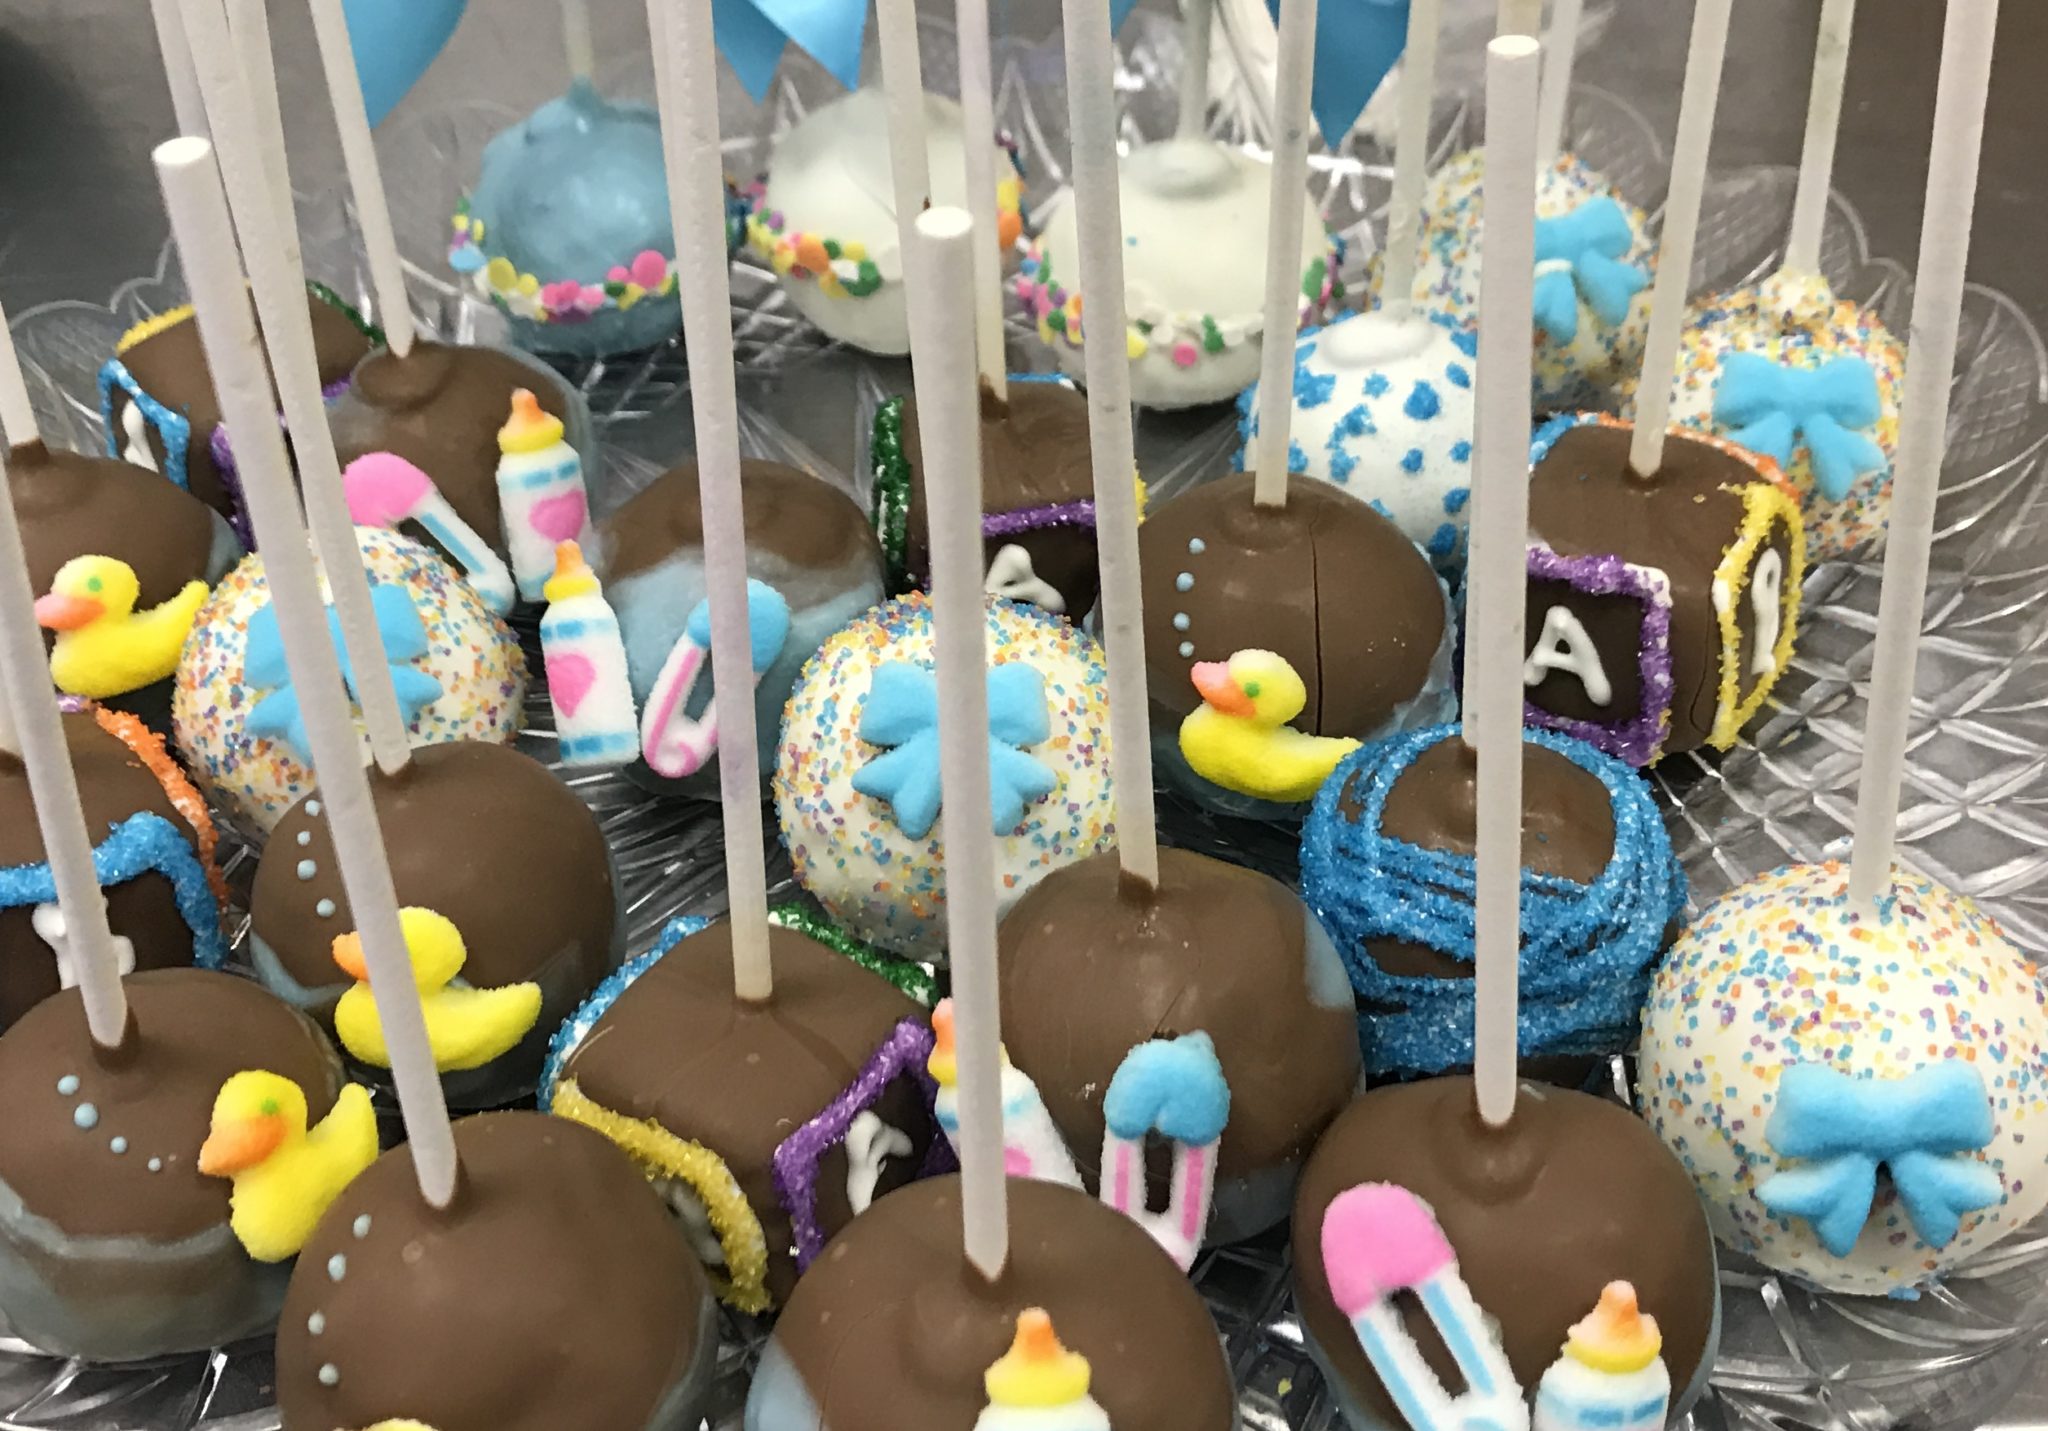 A tray of assorted baby shower cake pops.